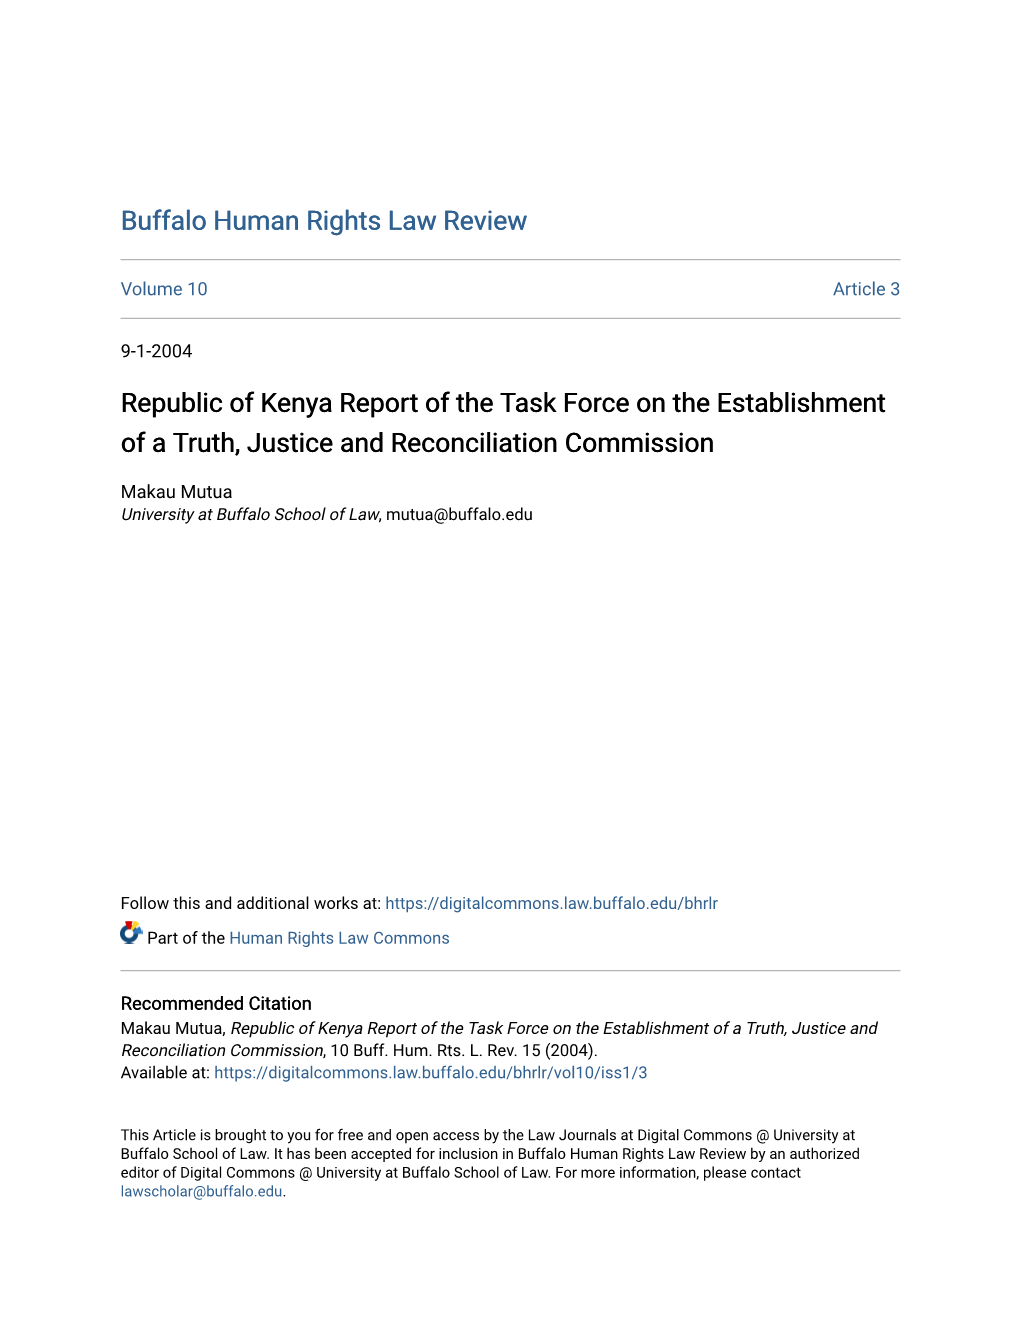 Republic of Kenya Report of the Task Force on the Establishment of a Truth, Justice and Reconciliation Commission